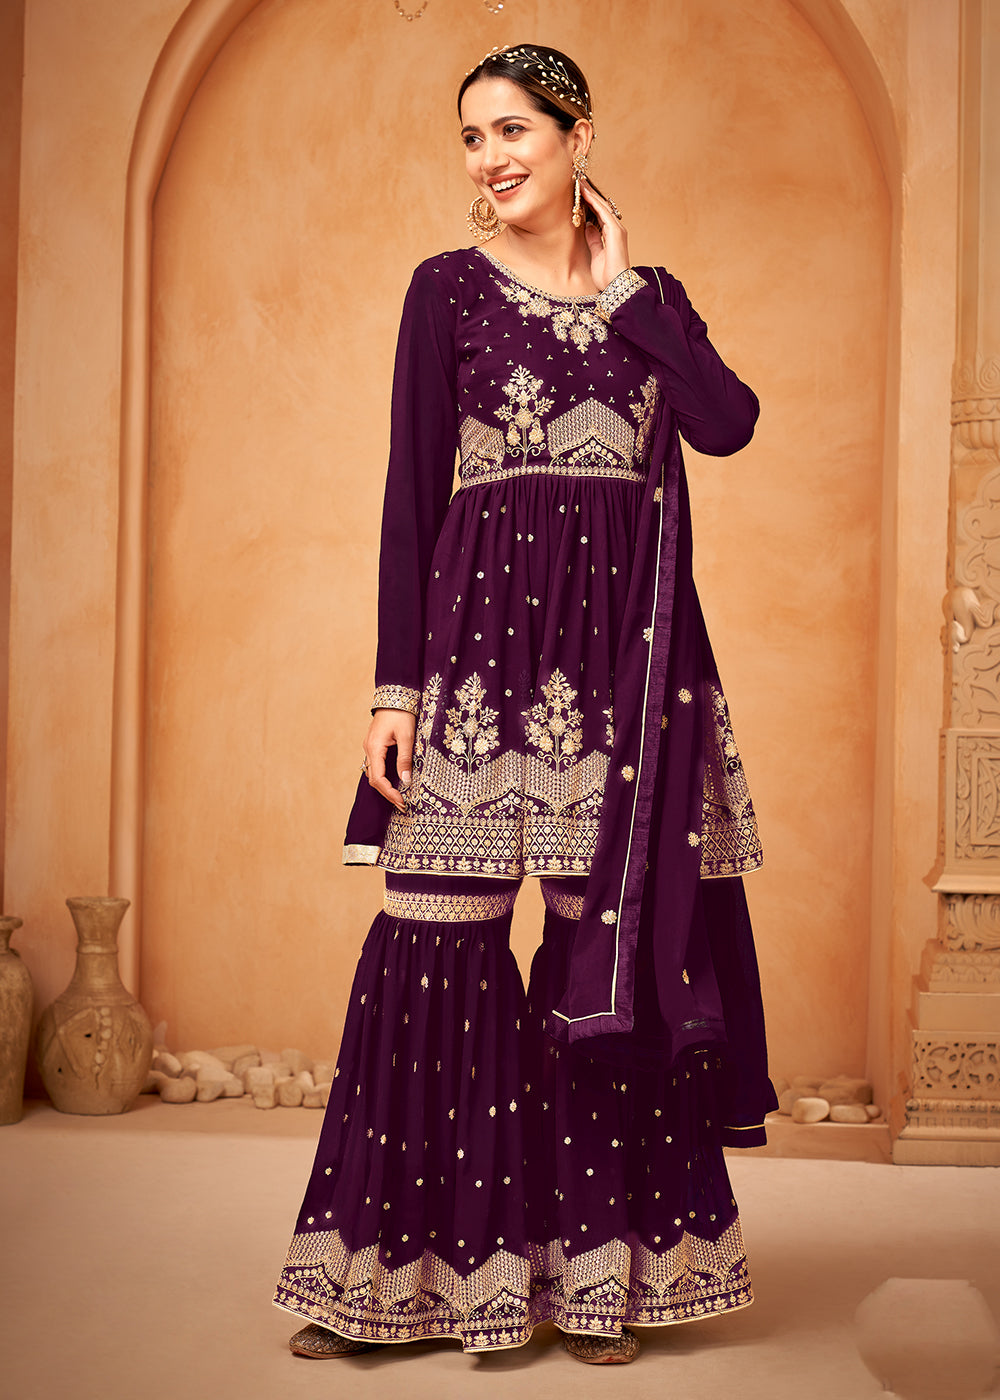 Shop Now Awesome Purple Embroidered Wedding Festive Gharara Suit Online at Empress Clothing in USA, UK, Canada, Germany & Worldwide. 